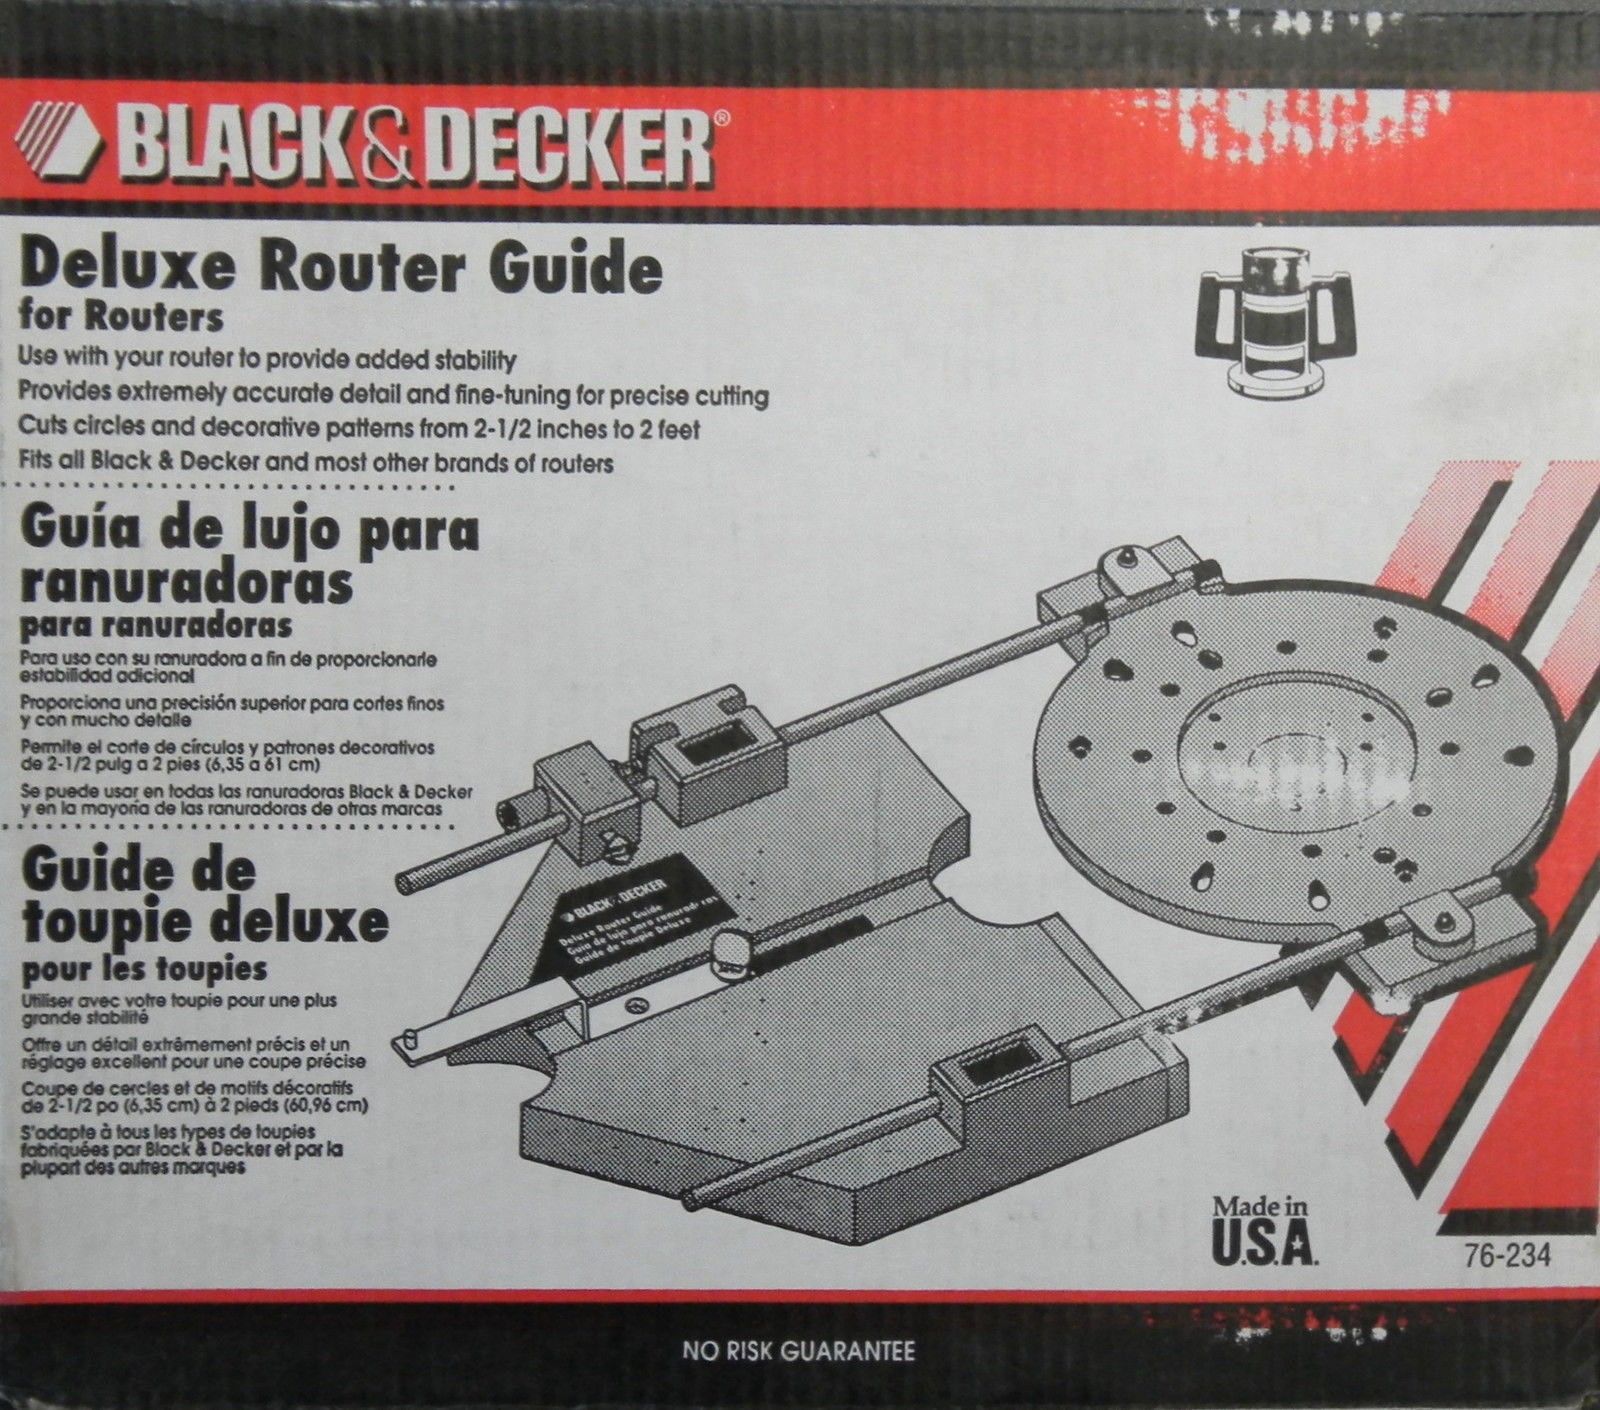 Black & Decker 76-234 Deluxe Router Guide USA